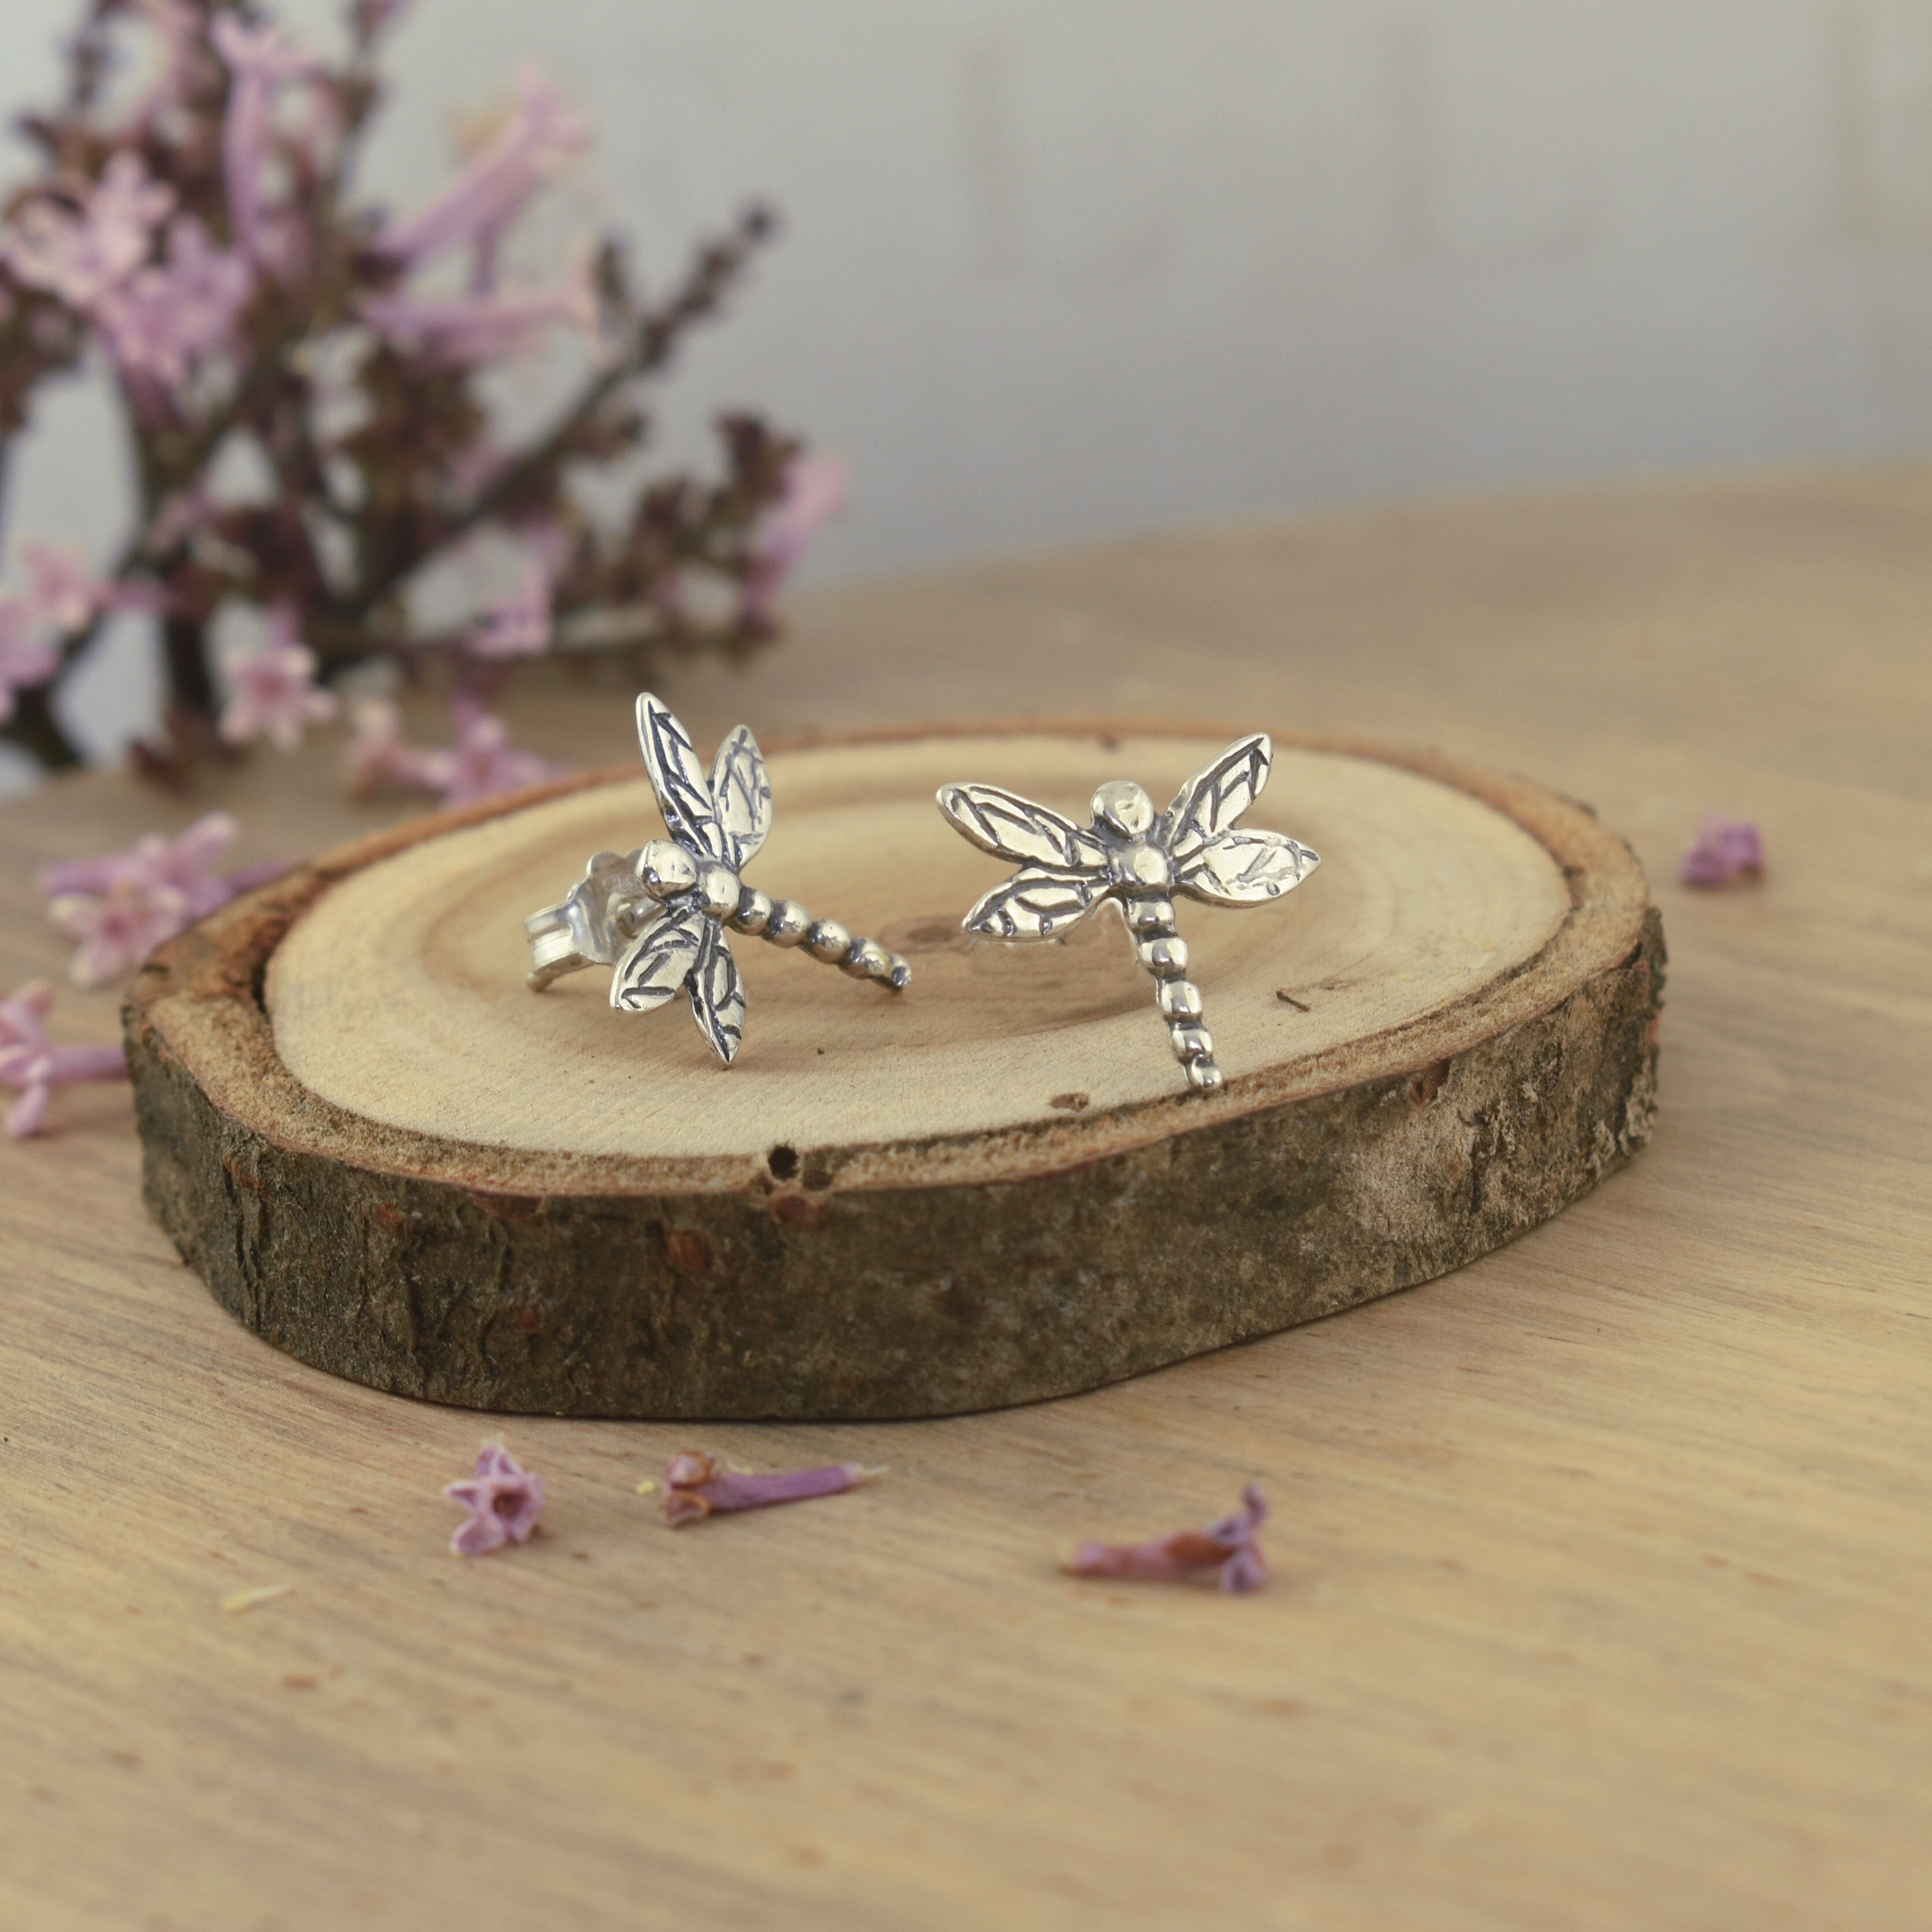 .925 sterling silver dragonfly earrings with push back post